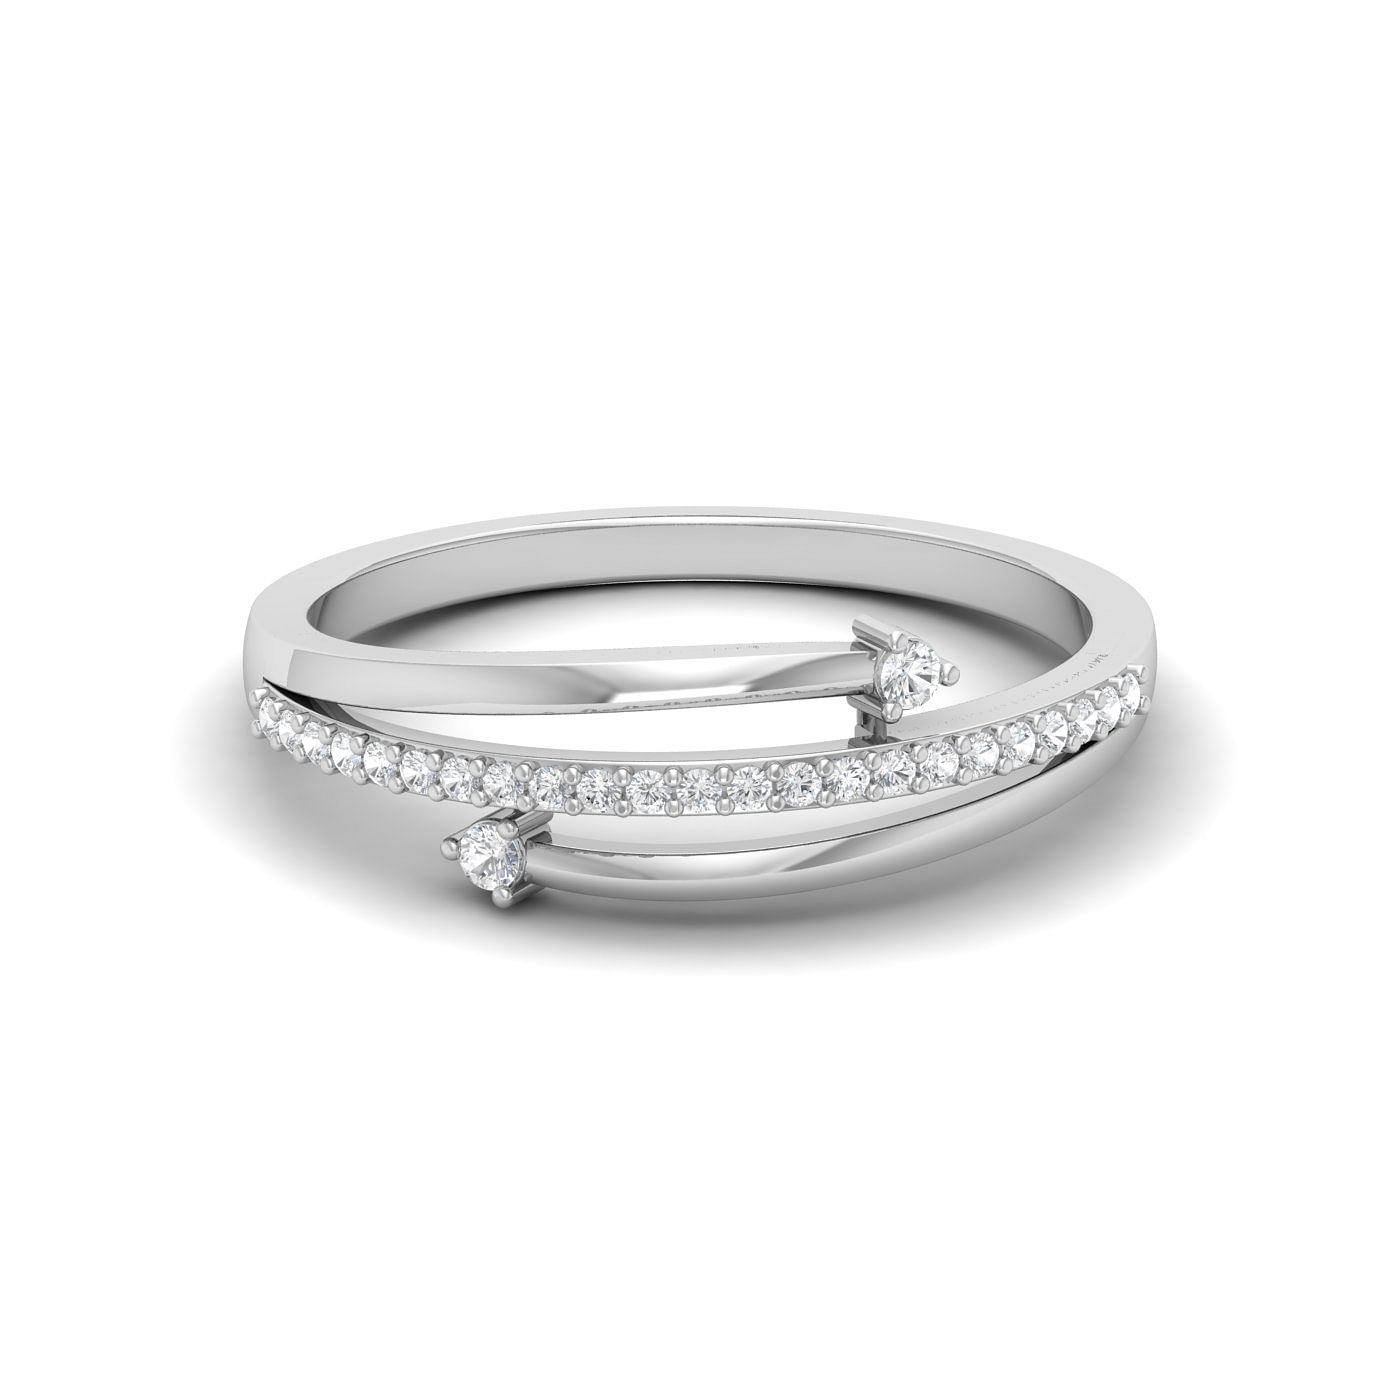 Half Eternity Spring Diamond Ring With White Gold For Gift For Her